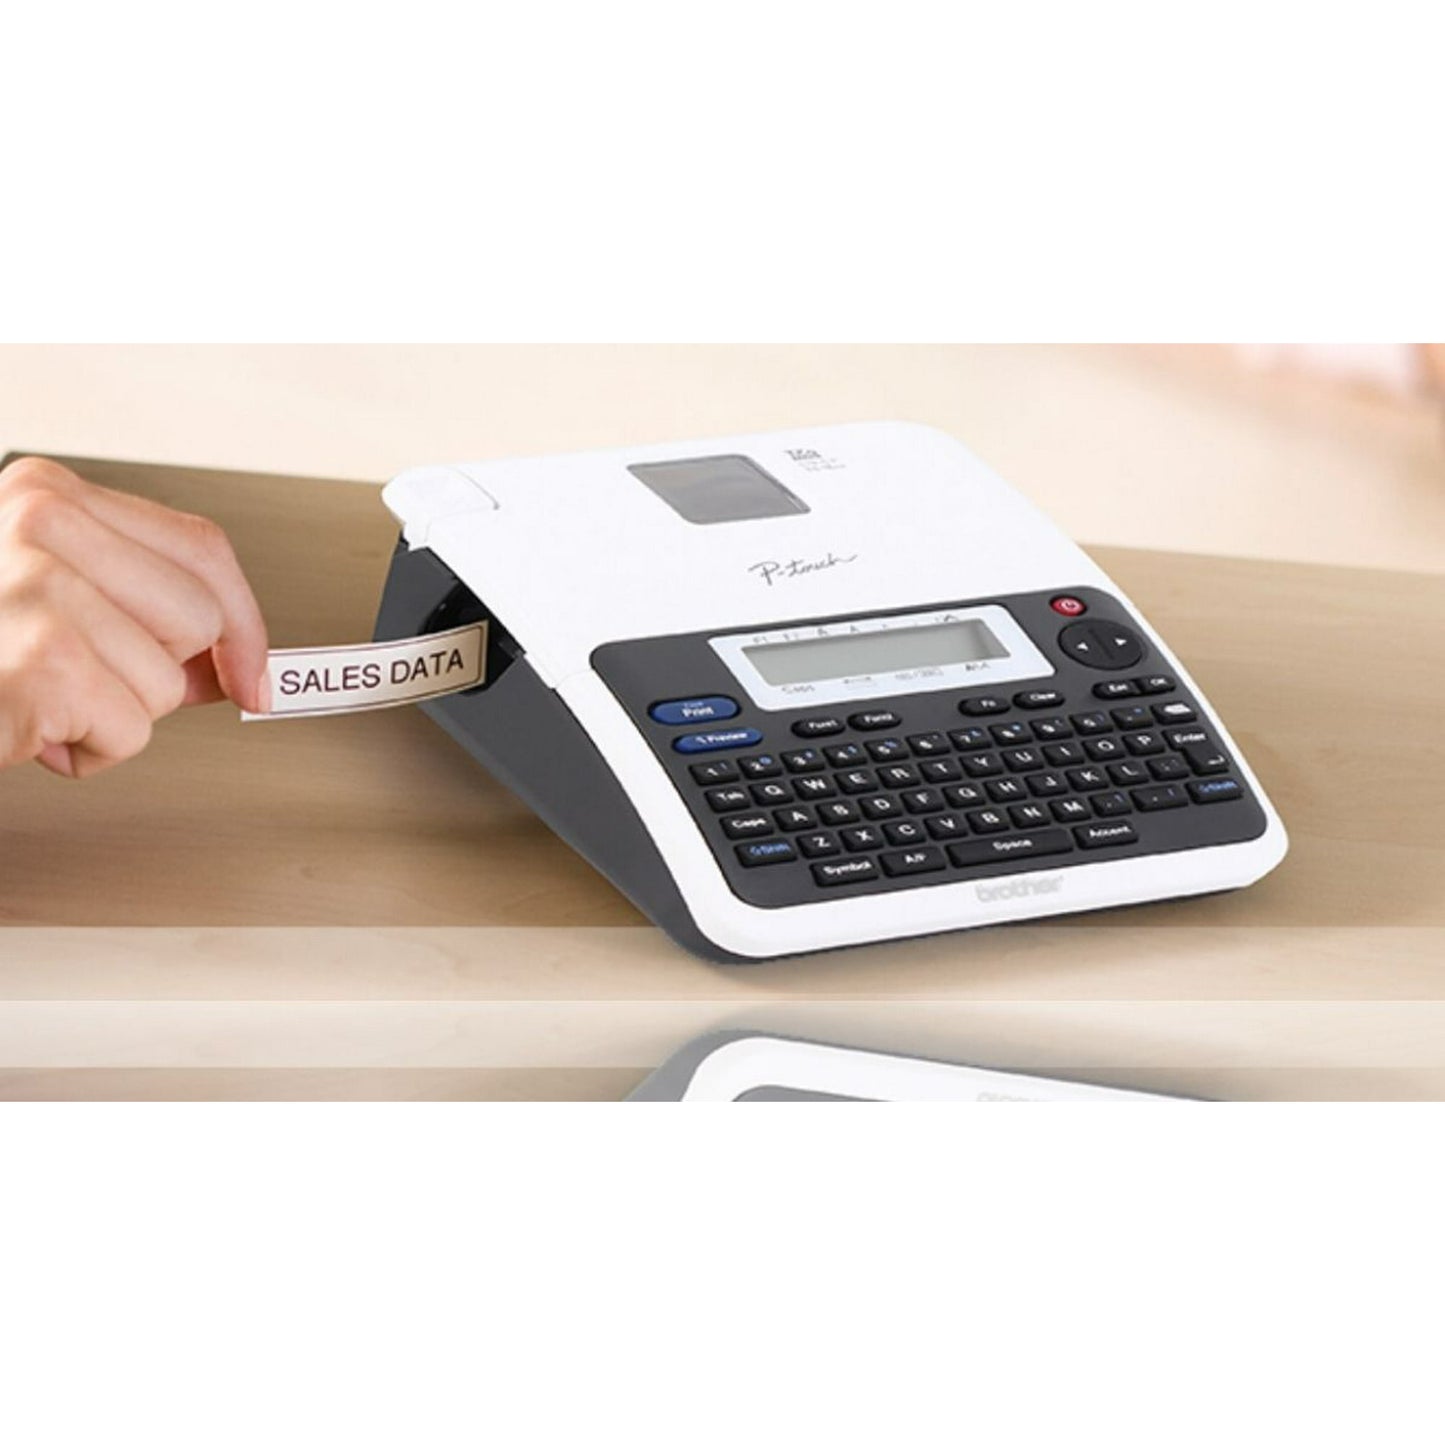 Brother P-Touch PT-2040C Label Maker/Supplies Included